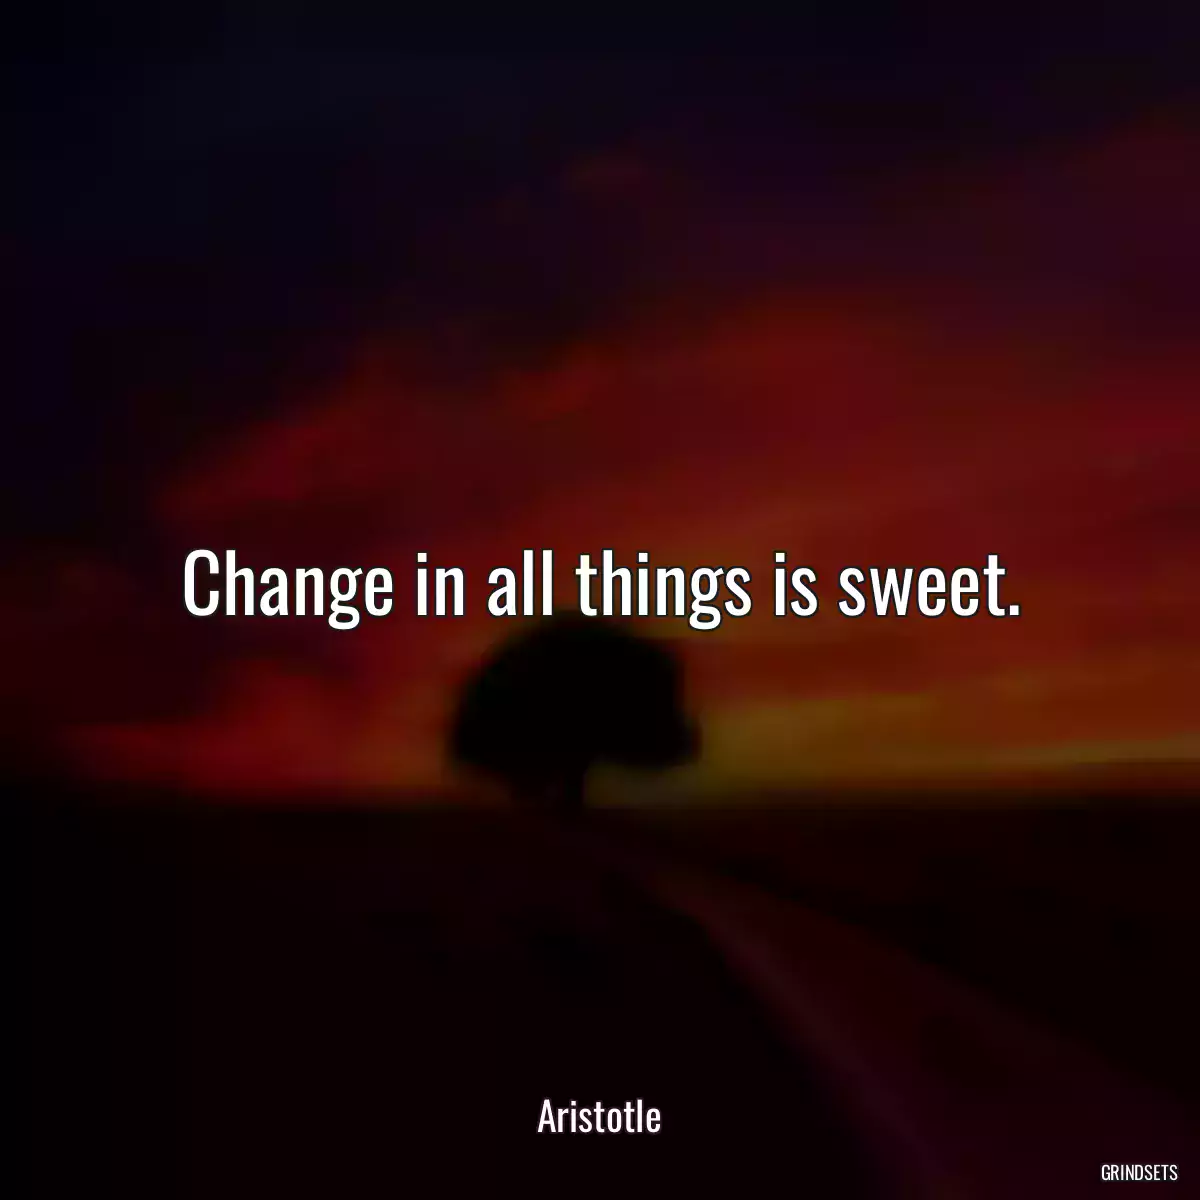 Change in all things is sweet.